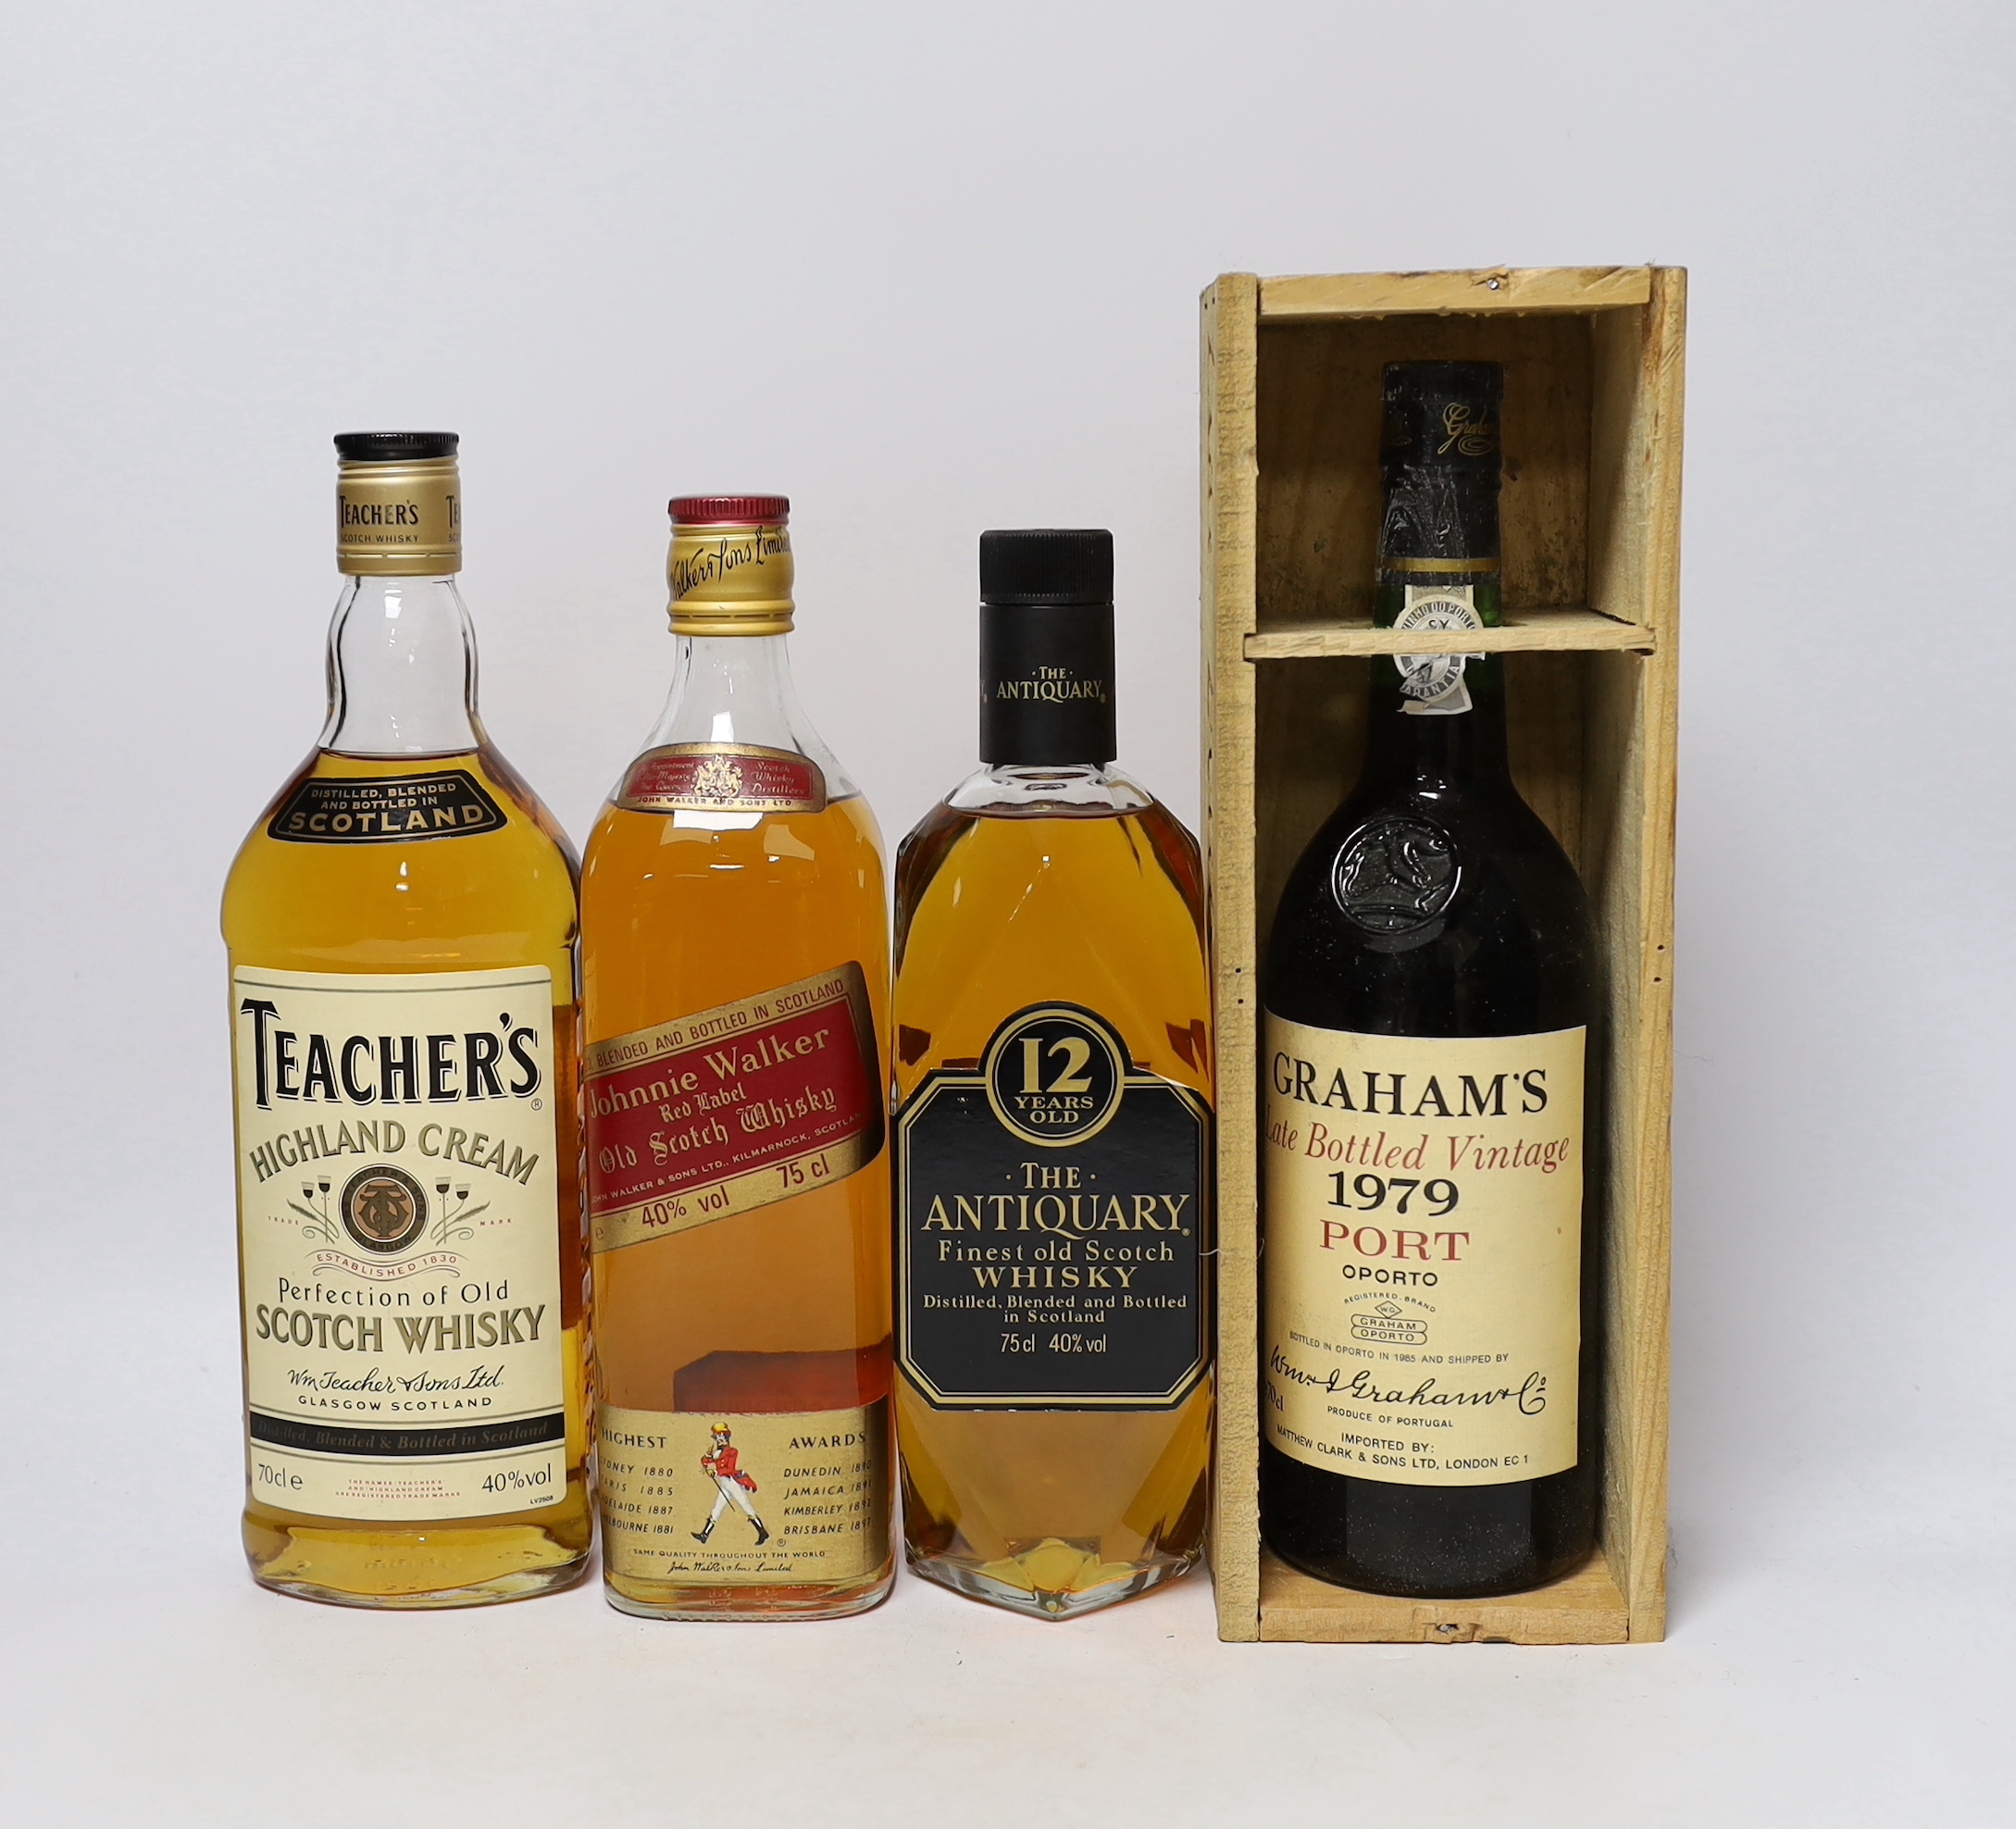 A bottle of The Antiquary Scotch Whisky, a bottle of Teachers and a bottle of Johnnie Walker, plus a cased bottle of Vintage Graham’s 1979 Port